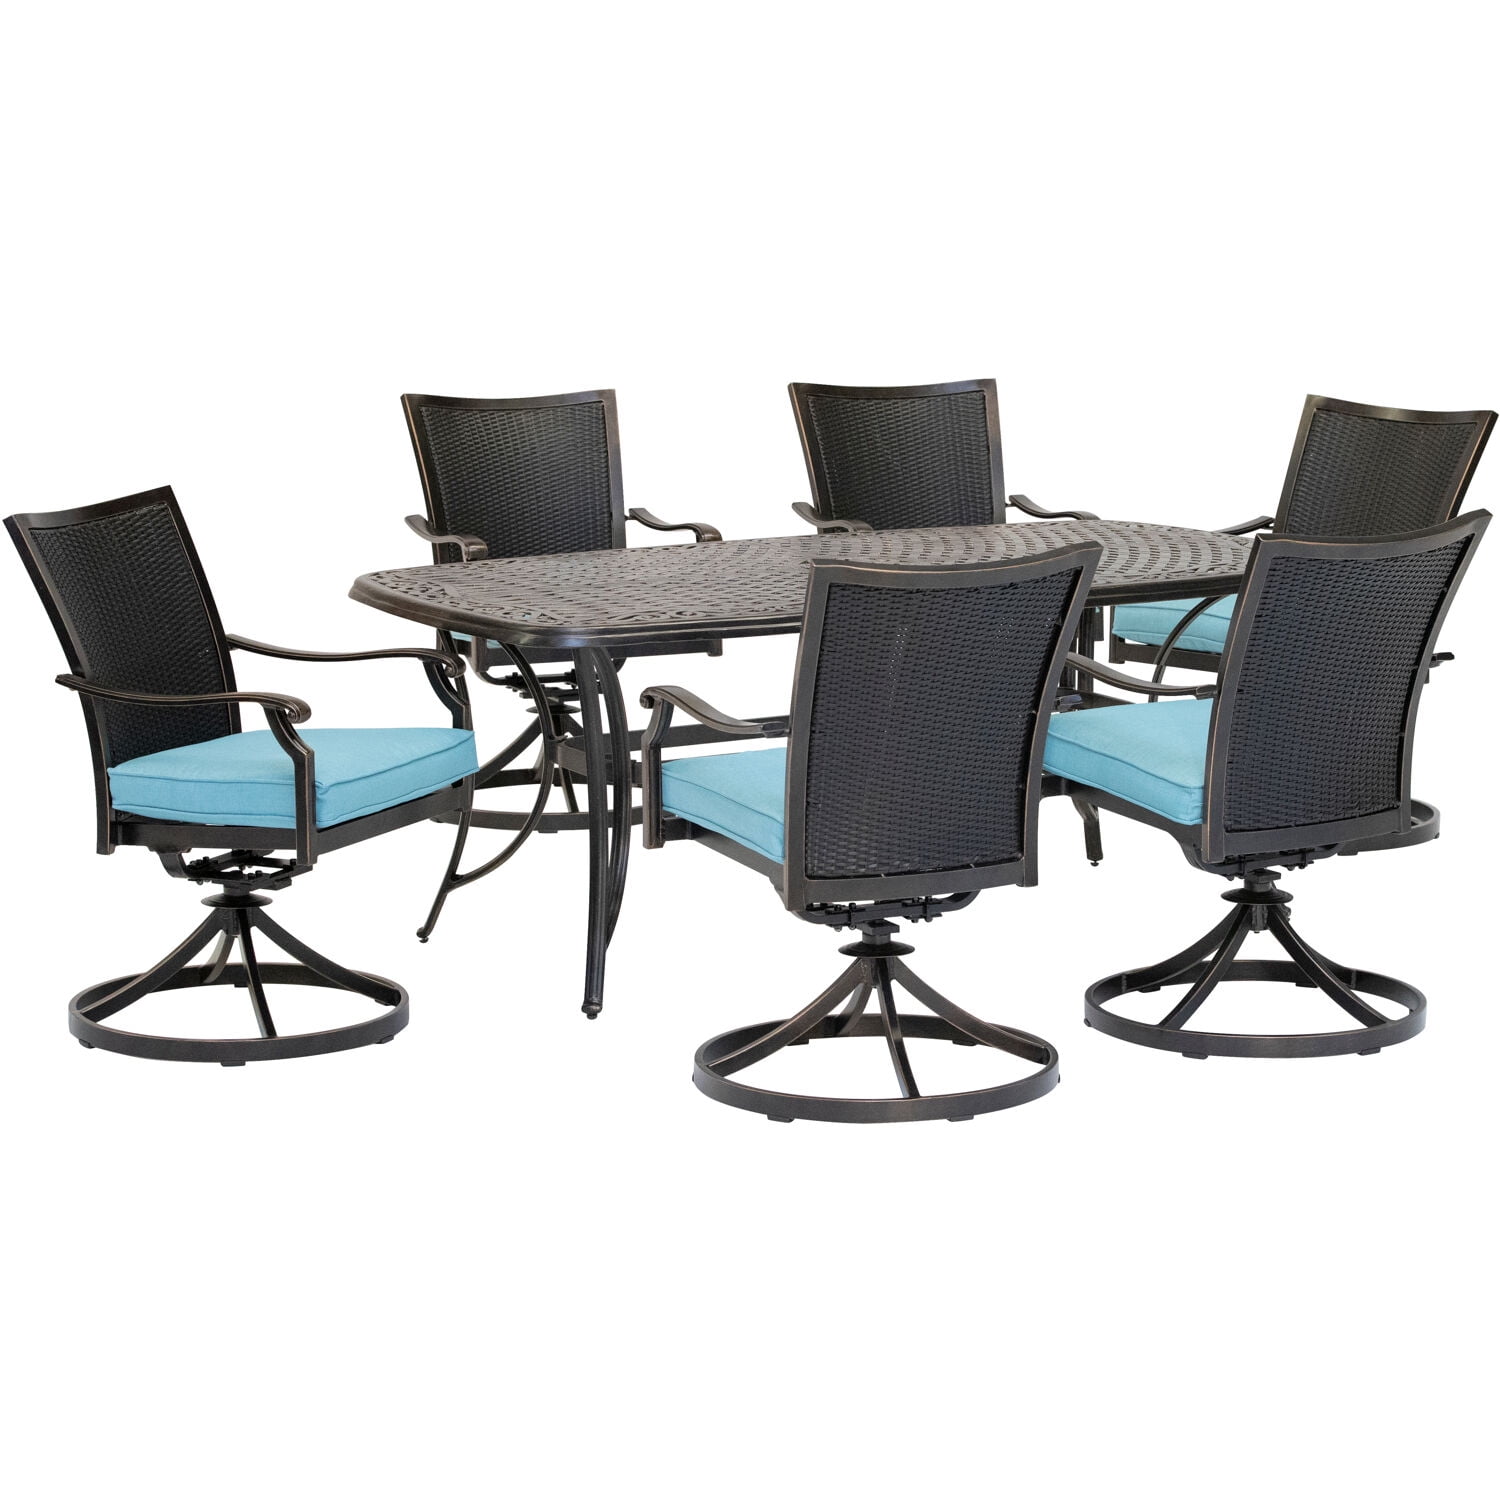 Hanover TRADITIONS7PC-BLU Traditions 7 Piece Dining Set in Blue Outdoor Furniture 